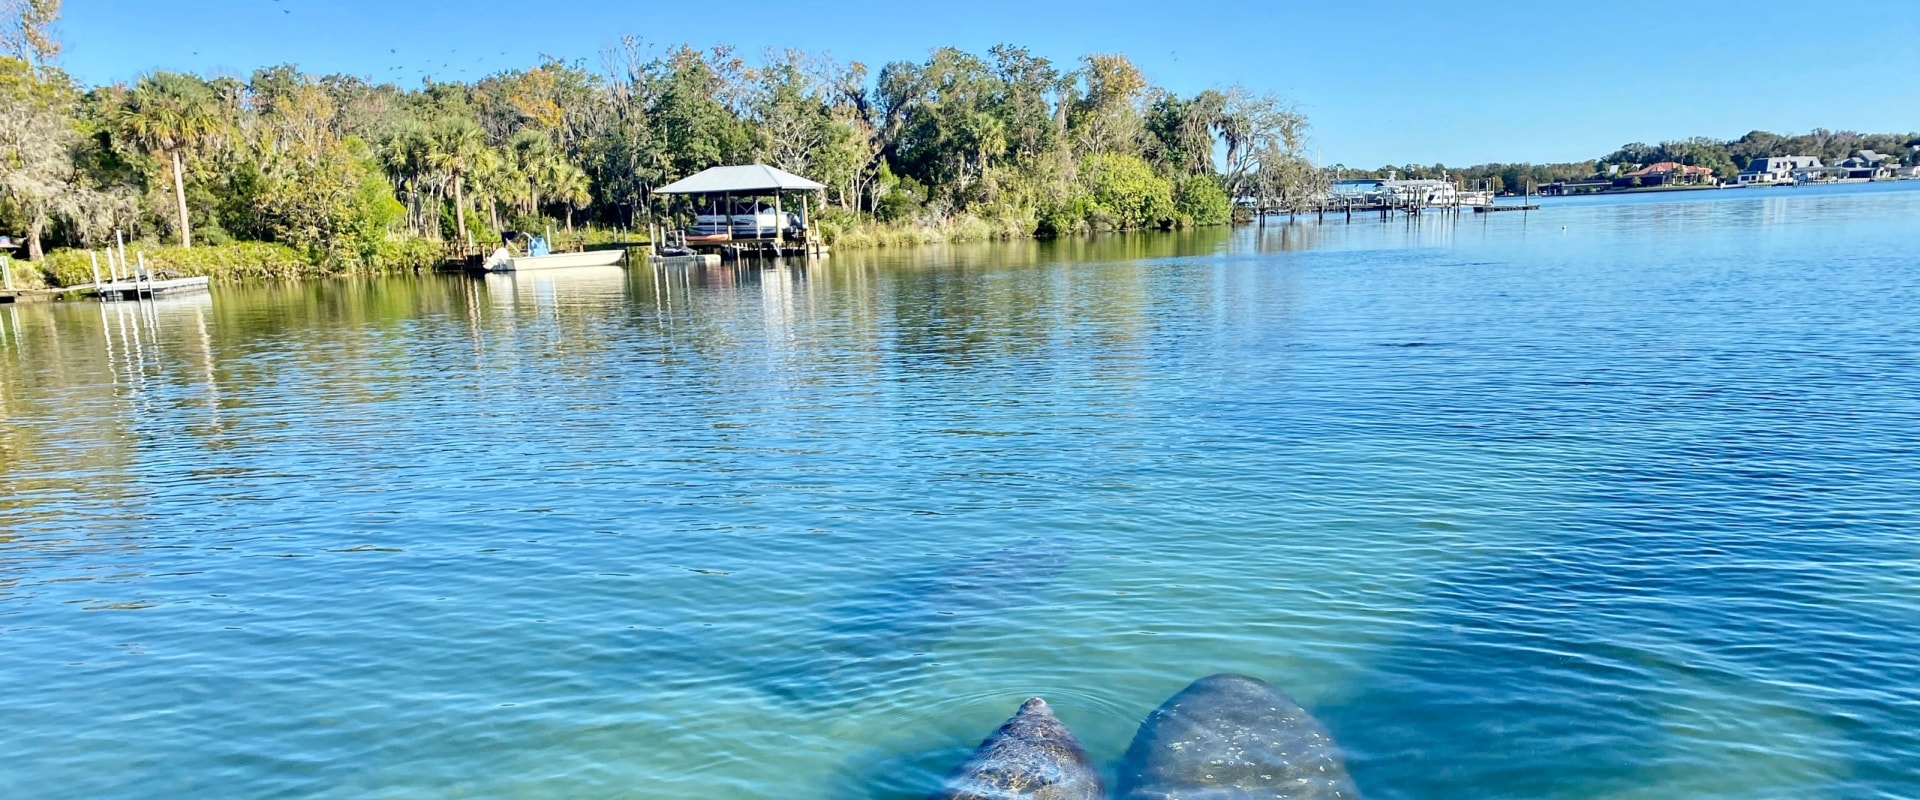 Exploring the Wild Side of Manatee County, FL